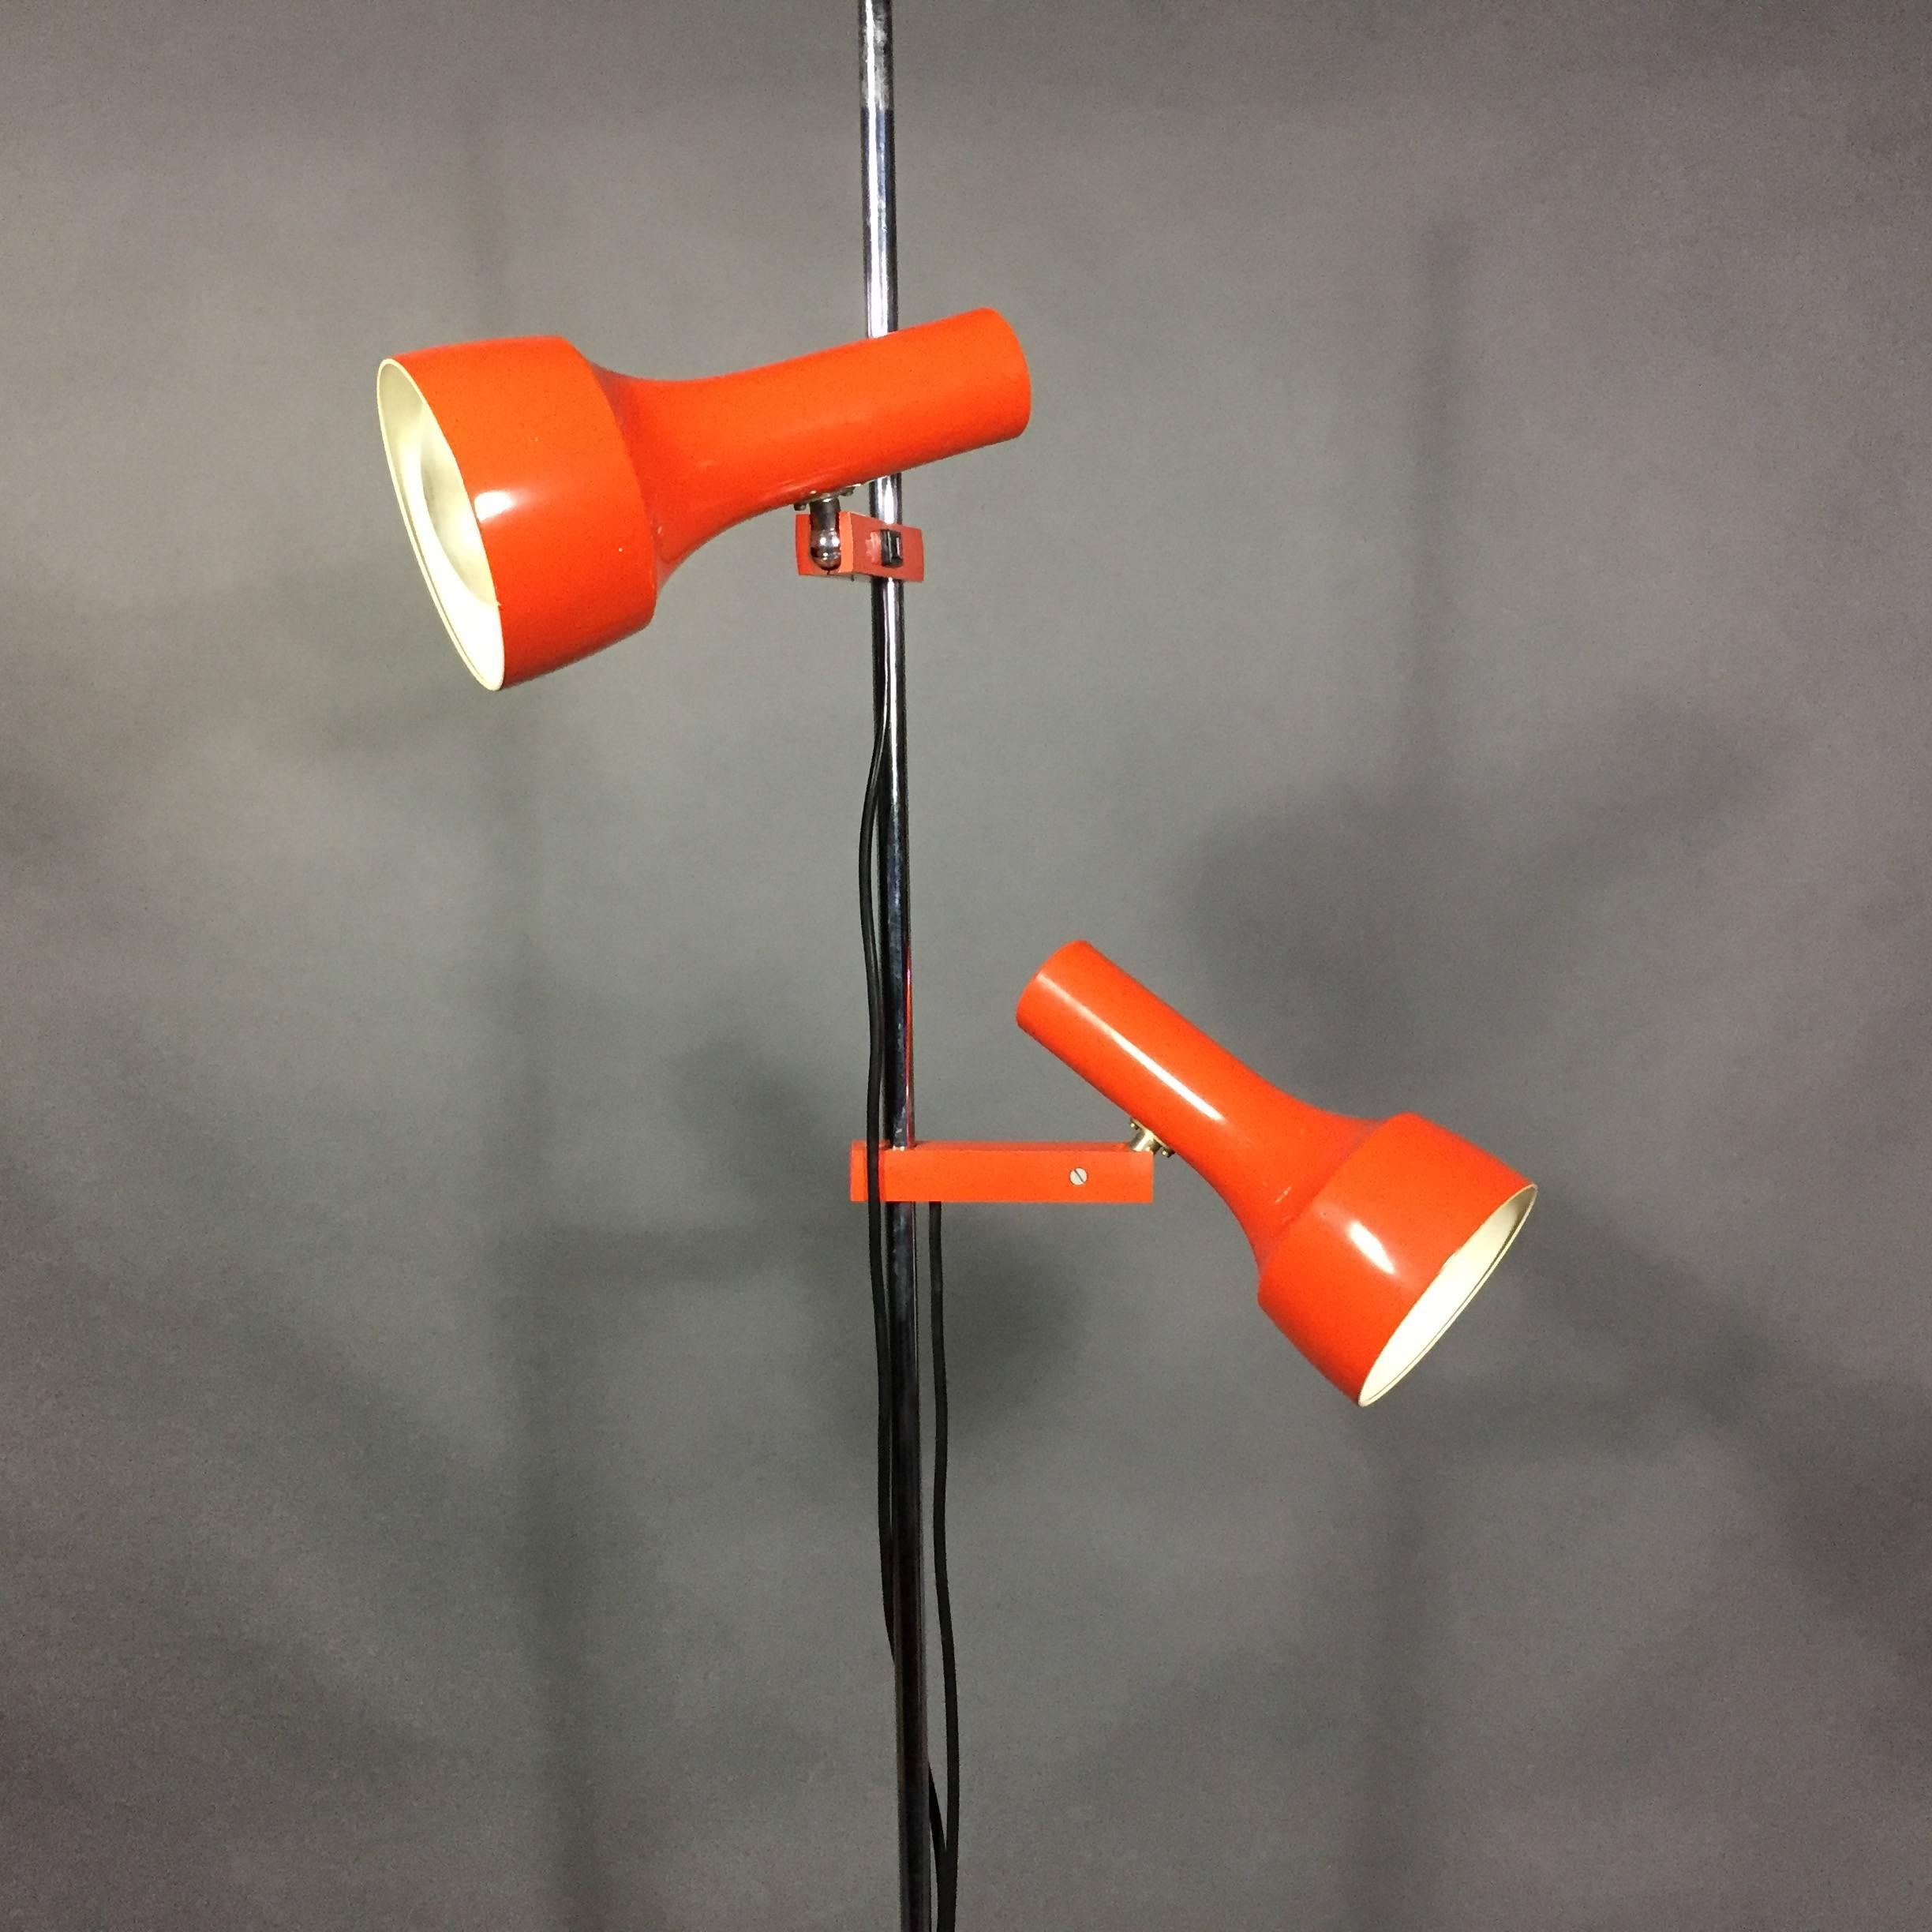 The fun side of midcentury lighting design at its best, with a double-shade lacquered metal in perfect orange by Kaiser Dell in Germany. Each shade is connected with lacquered metal posts that are moveable up and down the chrome post and are both